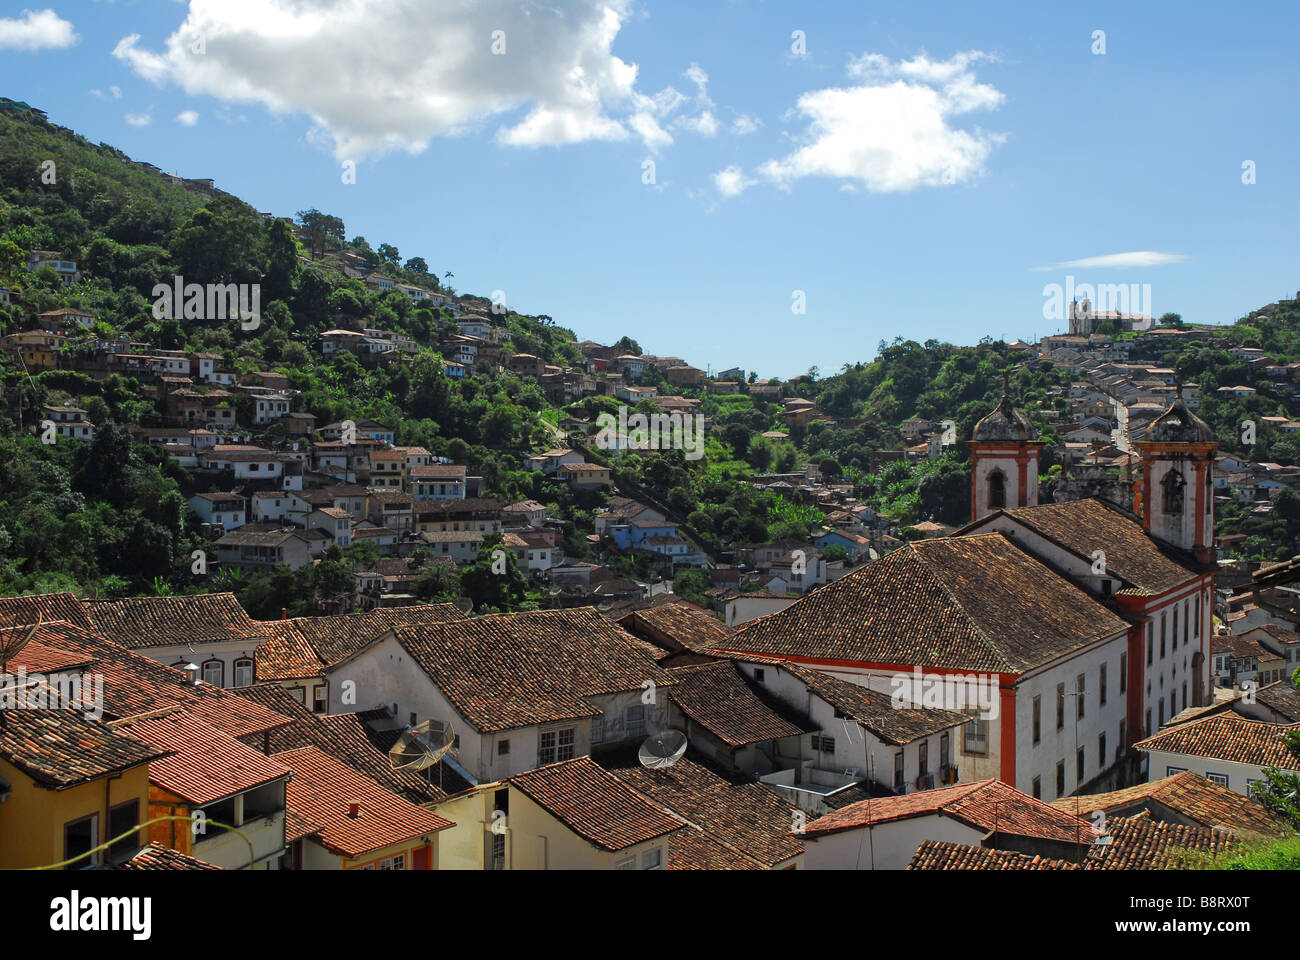 A hillside view of Ouro Preto, an historic, colonial gold mining town in the state of Minas Gerais, Brazil Stock Photo